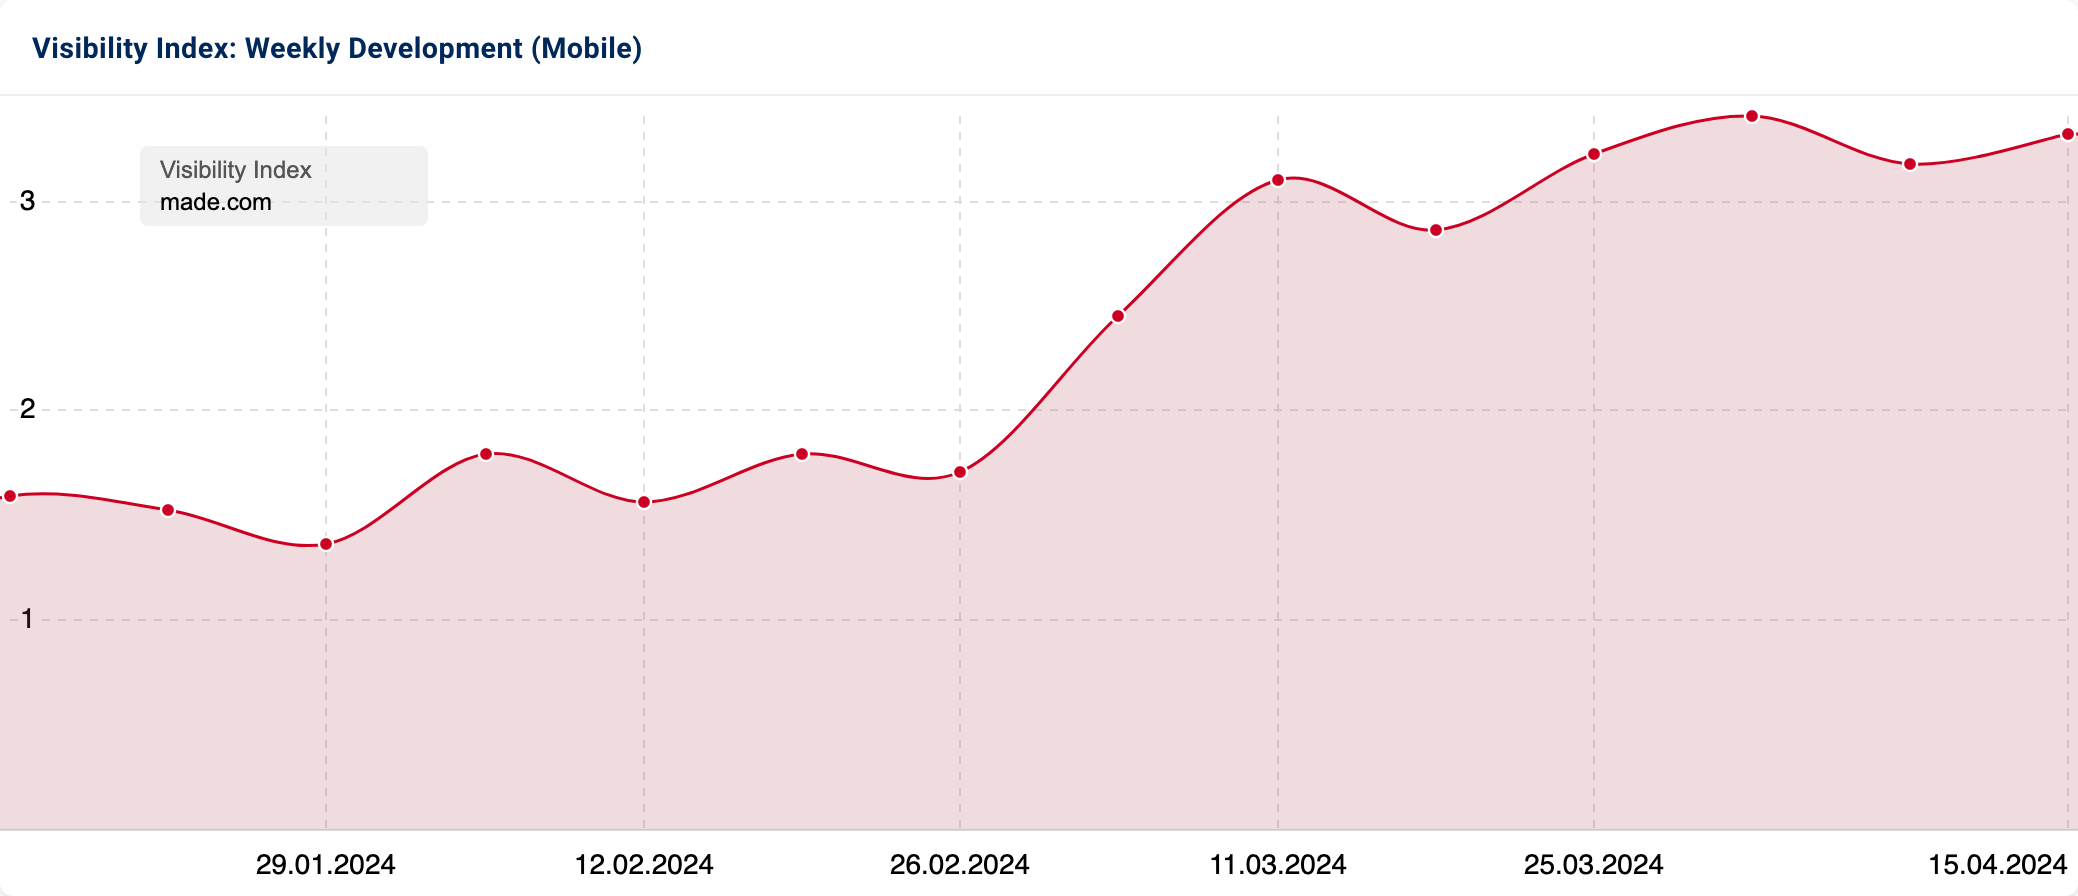 Graph with Visibility Index of "made.com".